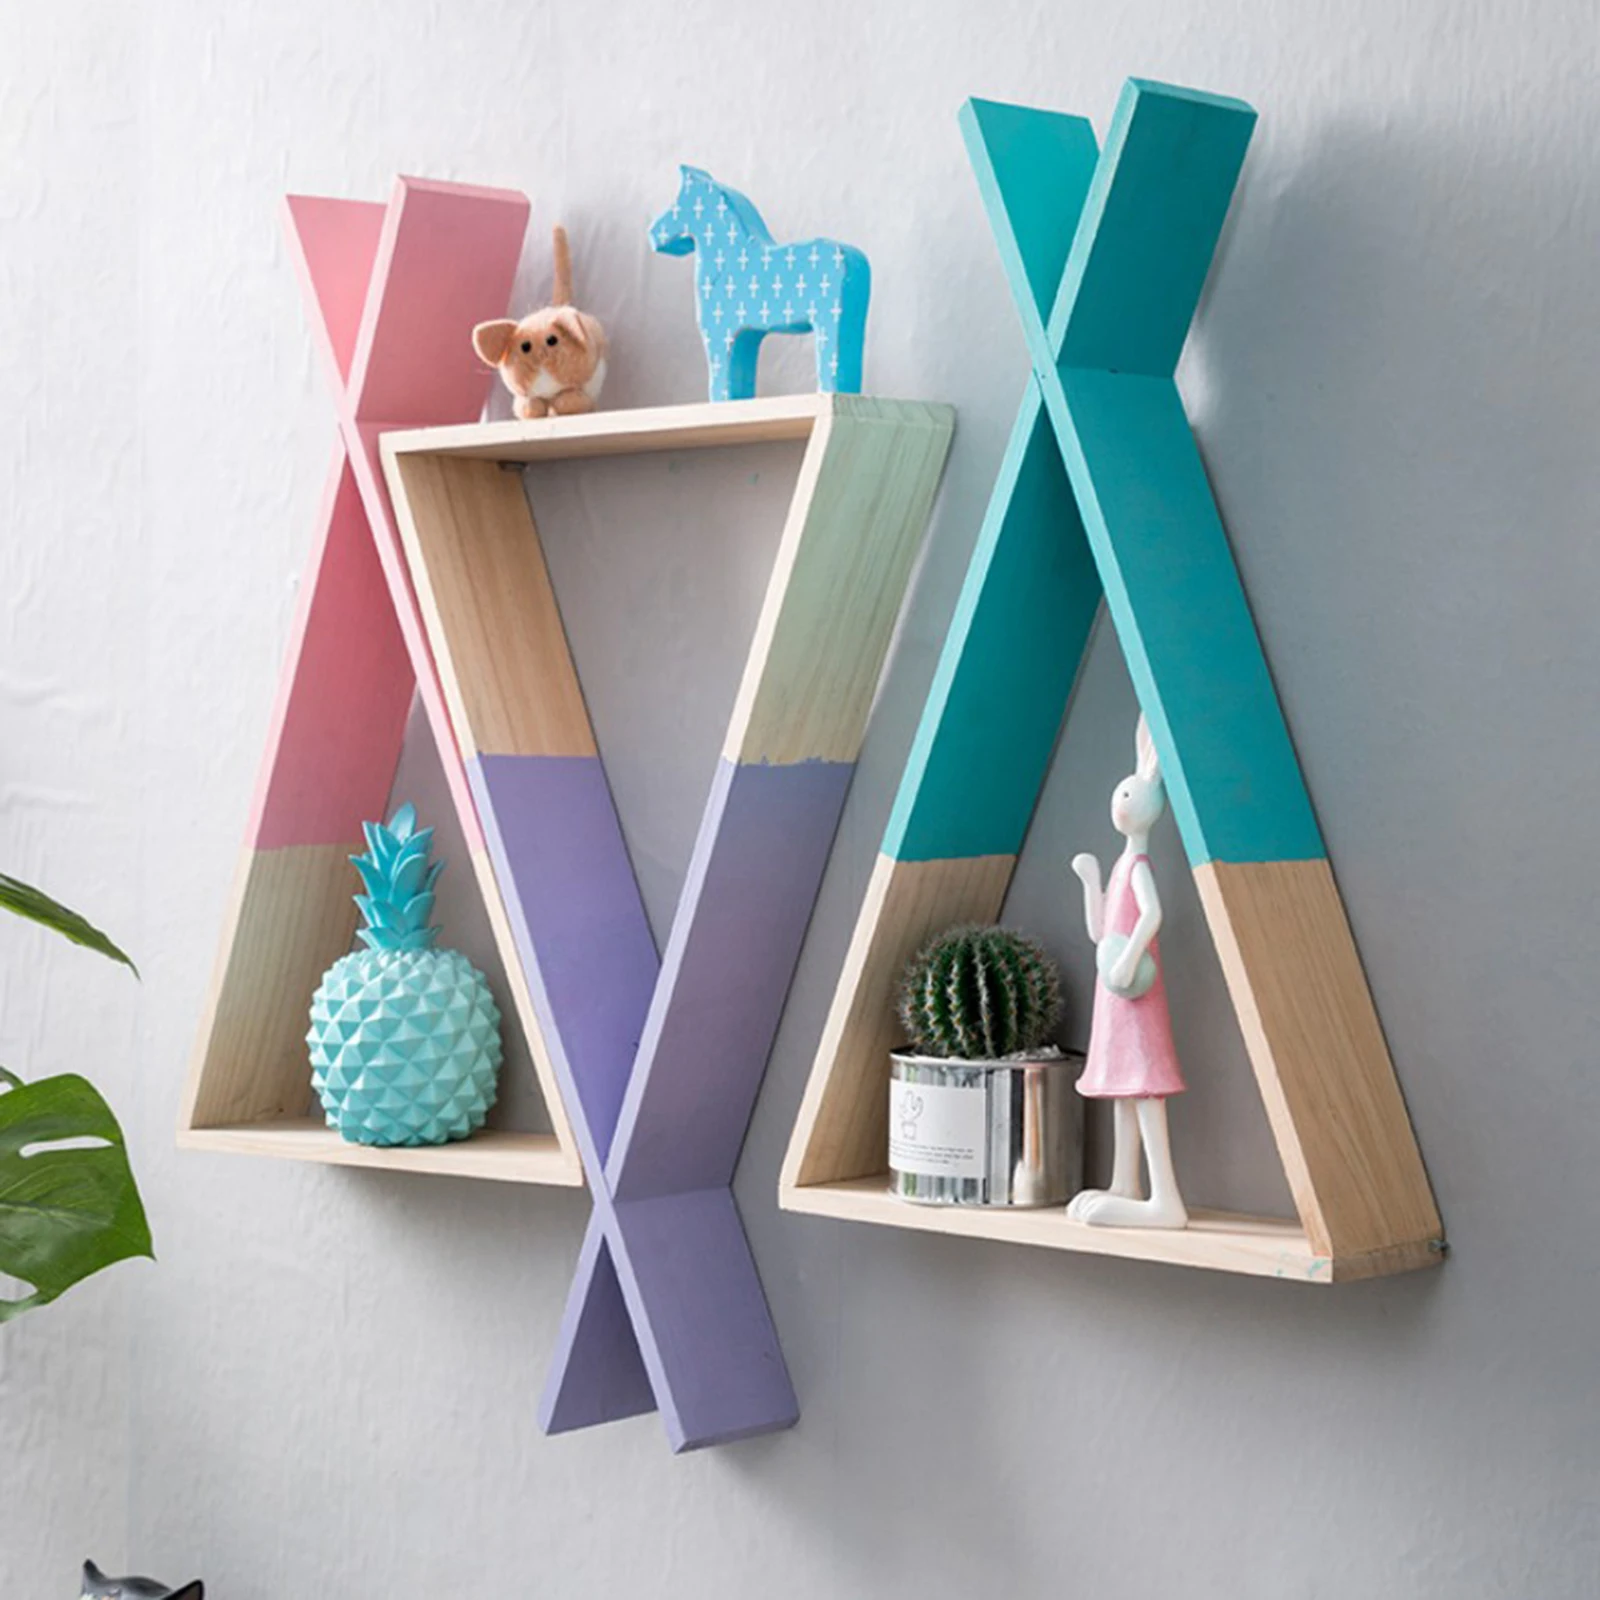 Nordic Style Baby Wooden Wall Shelf Hanging Display Triangle Rack Bookshelf Bedroom Art Office Lovely Colors